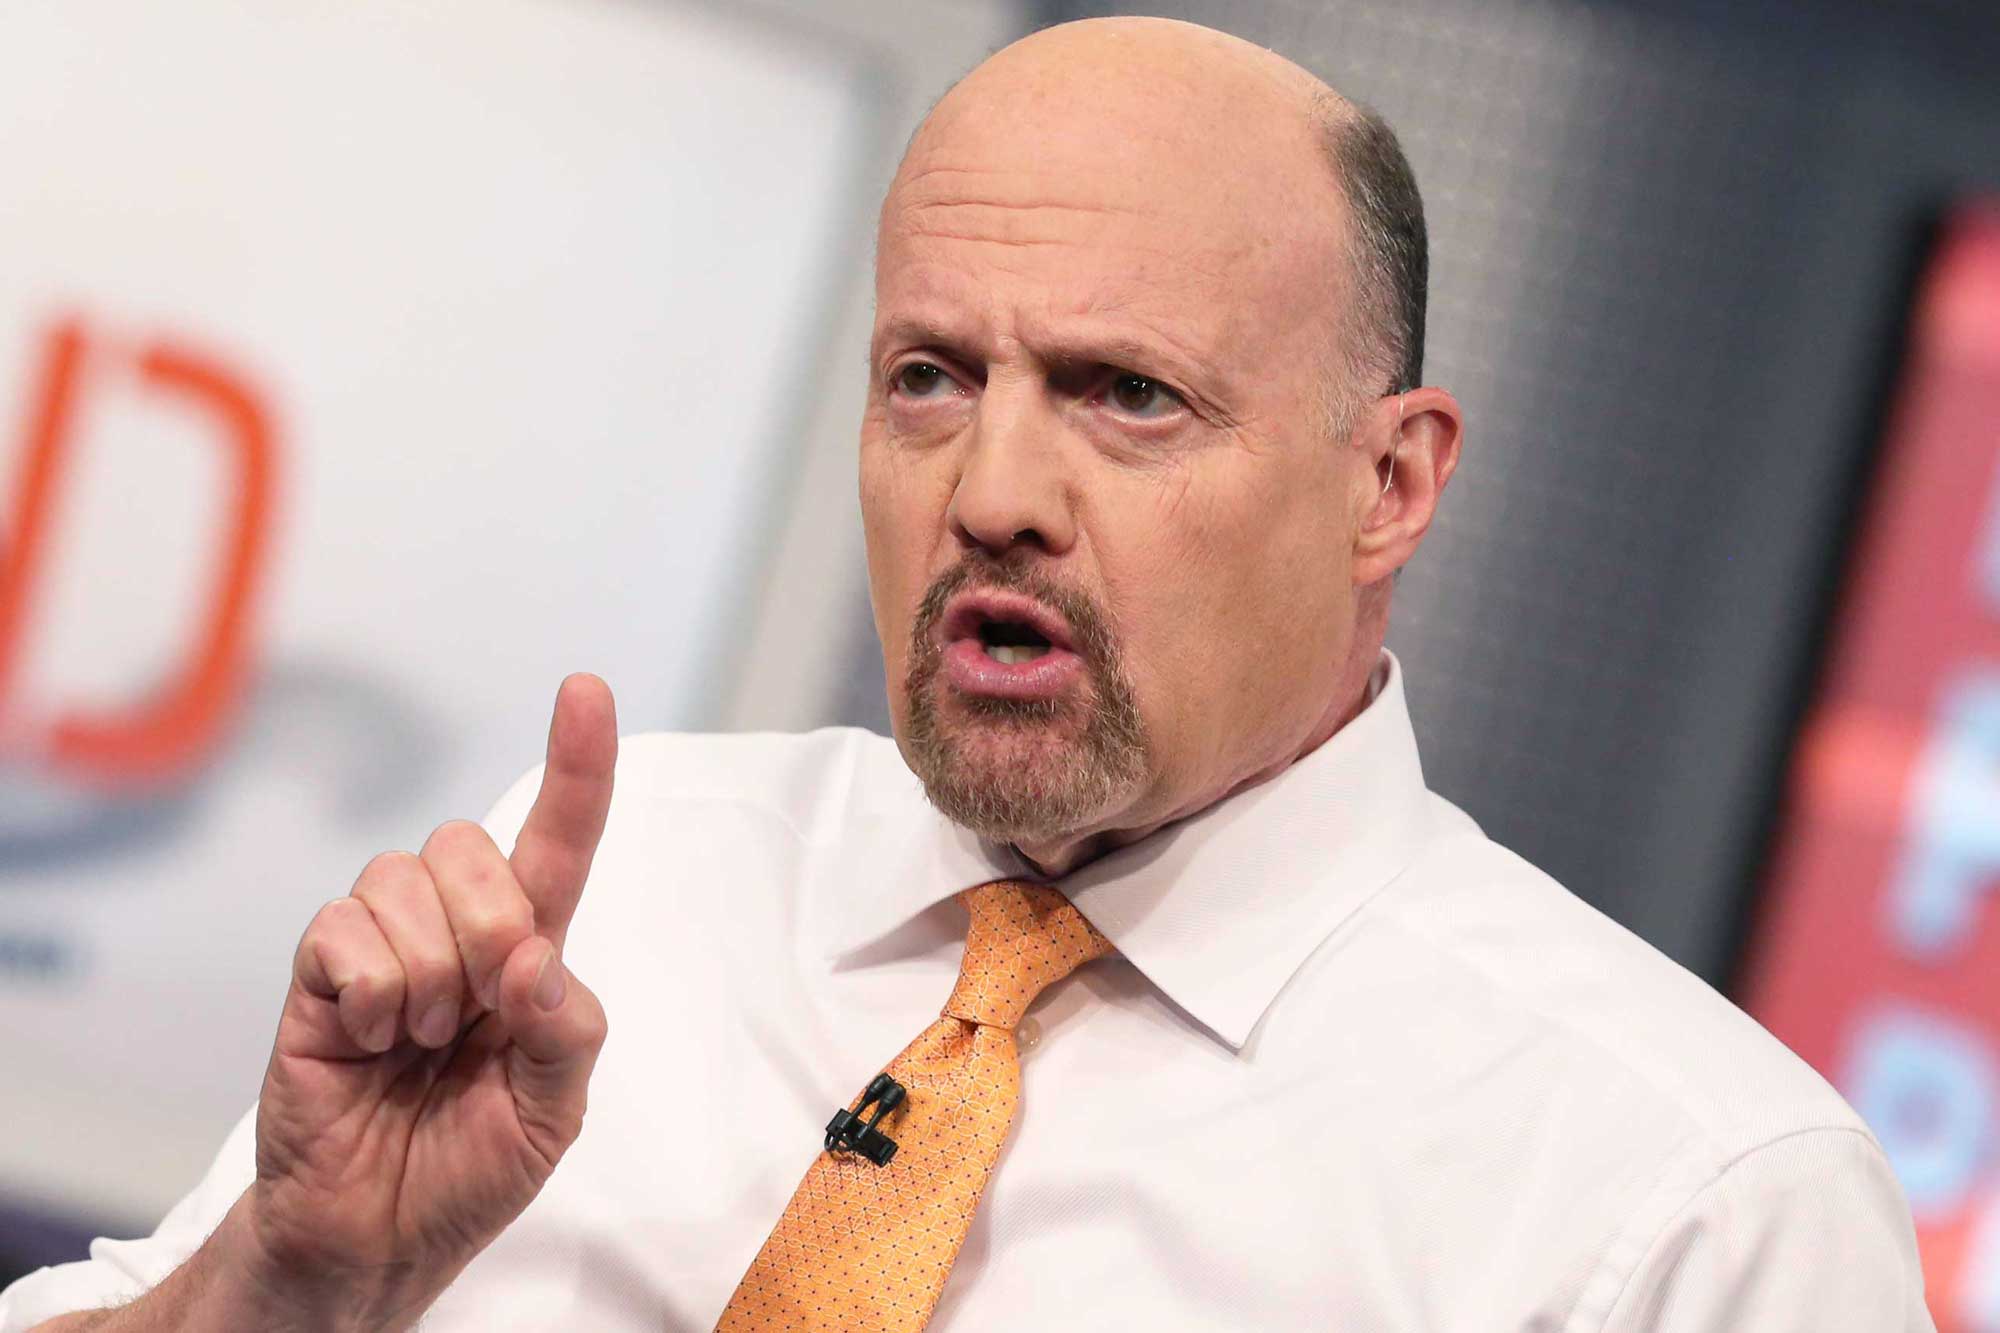 Jim Cramer’s advice for young stock investors who want to build wealth